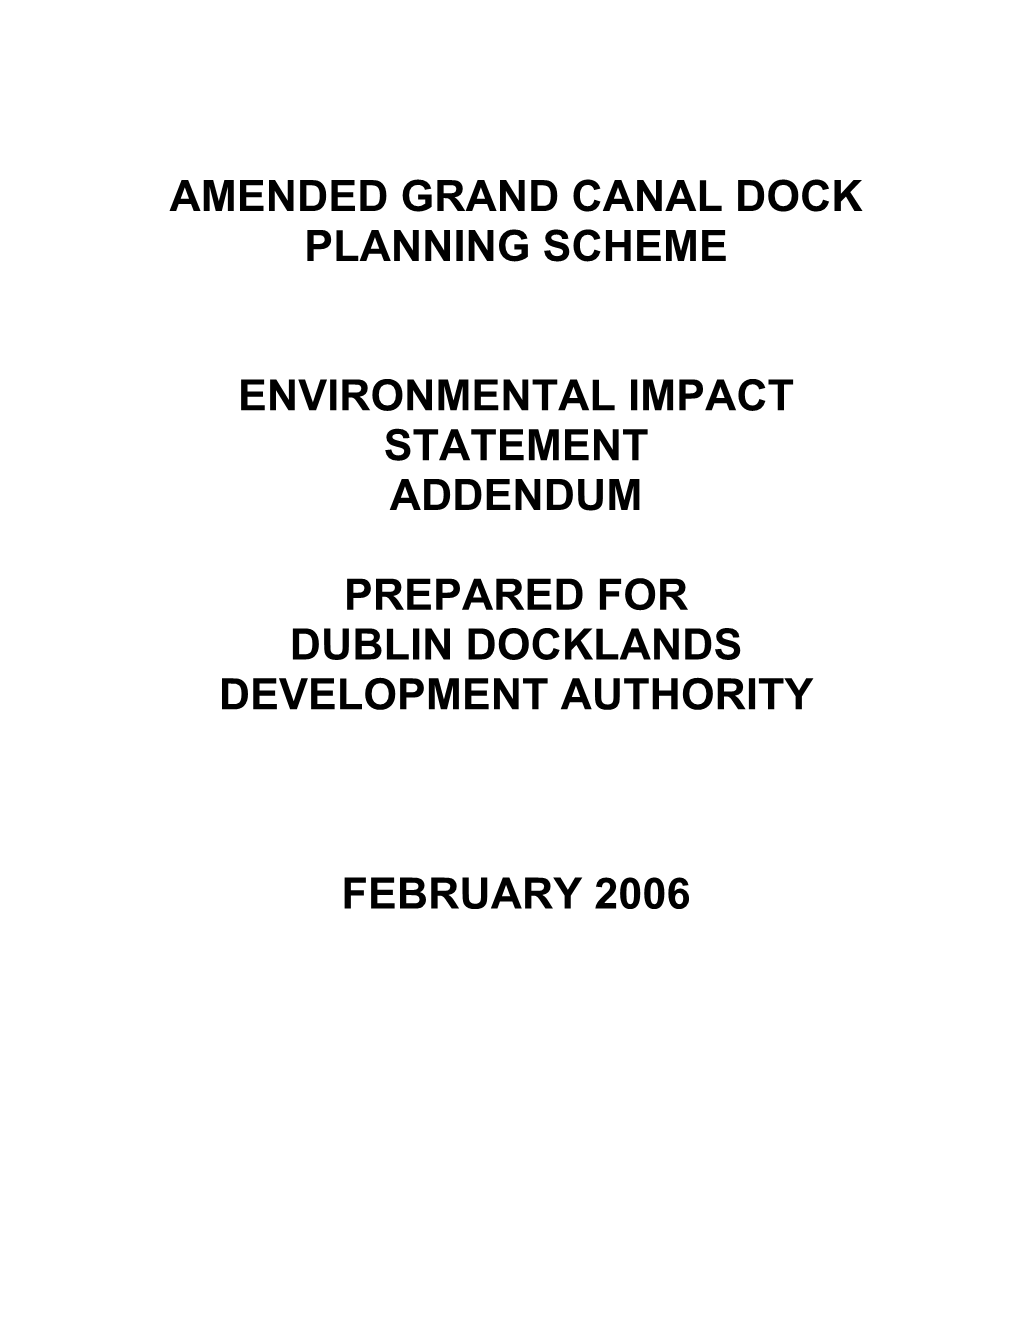 Amended Grand Canal Dock Planning Scheme